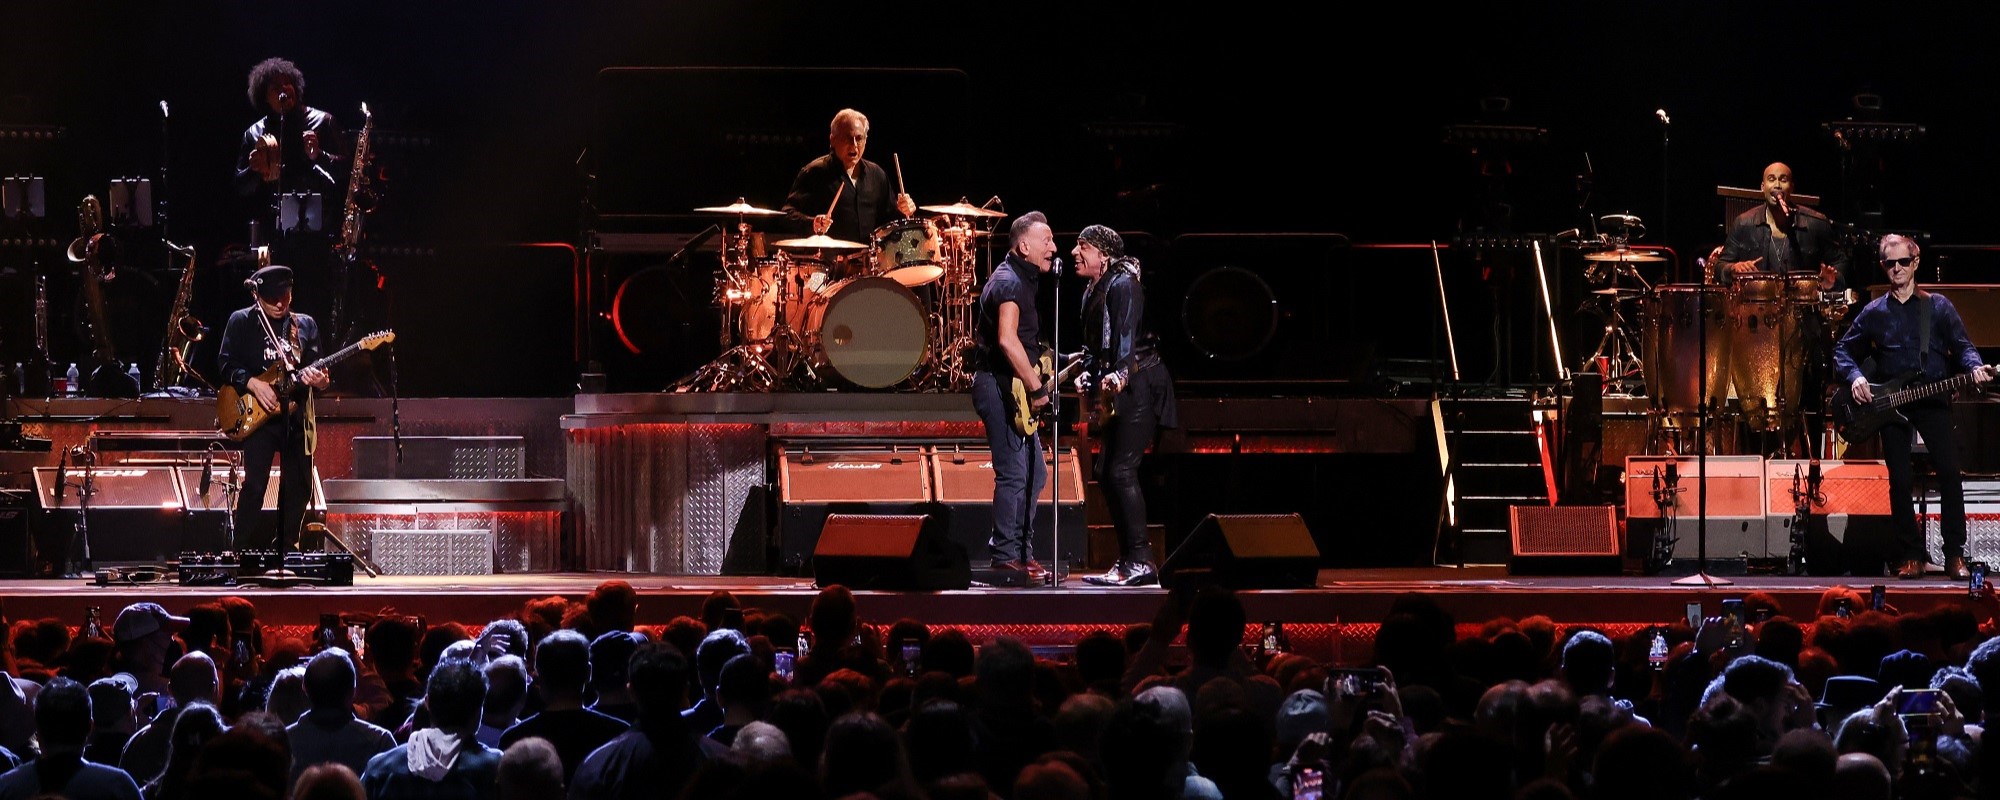 Watch Bruce Springsteen & the E Street Band’s Hilarious Rendition of ‘The Beverly Hillbillies’ Theme Song